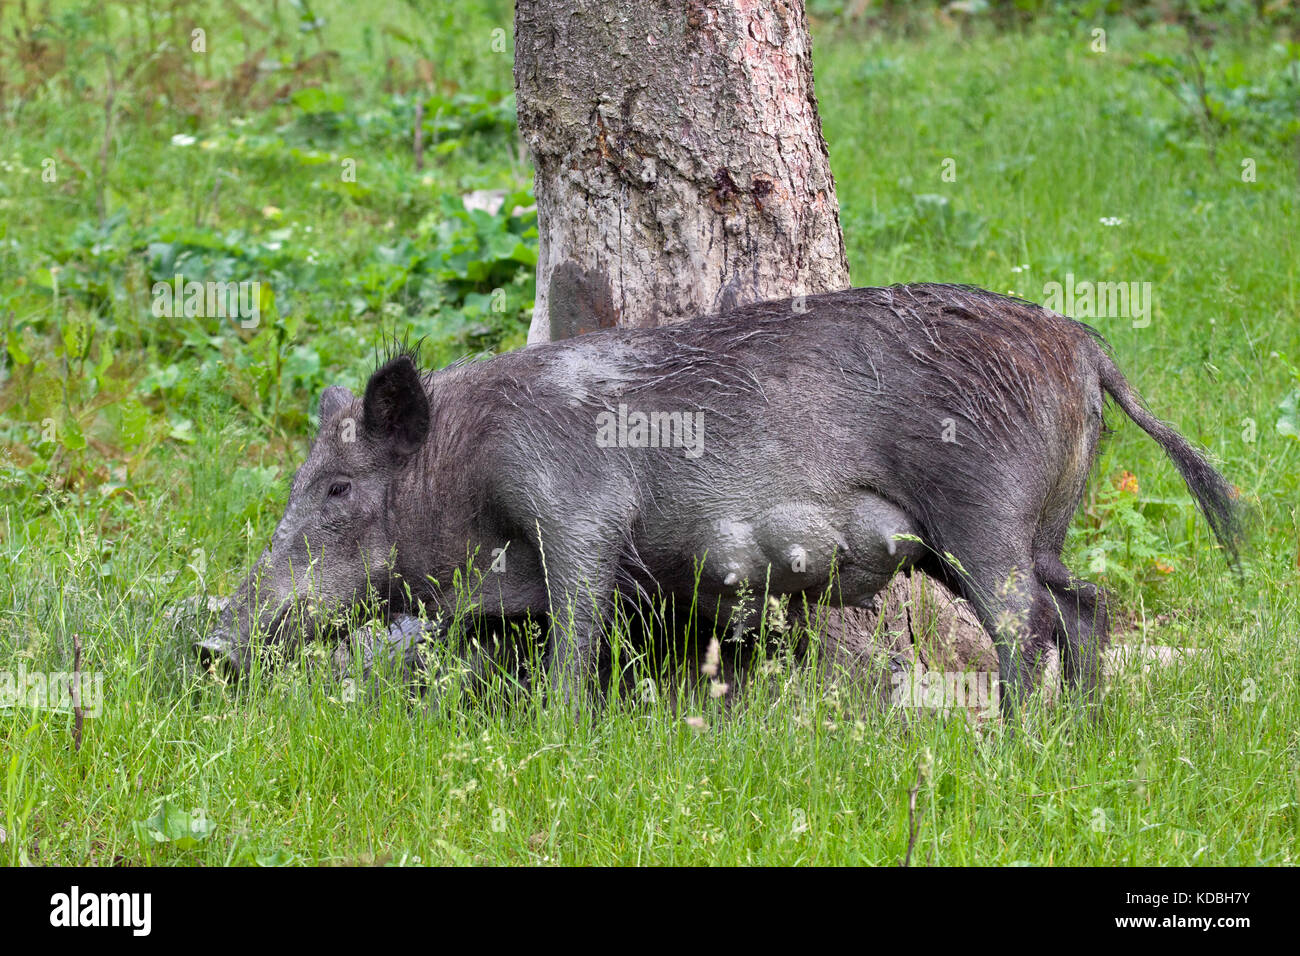 Wild boar (Sus scrofa) sow rubbing tree to remove dirt and parasites from its skin as well as just to scratch an itch Stock Photo